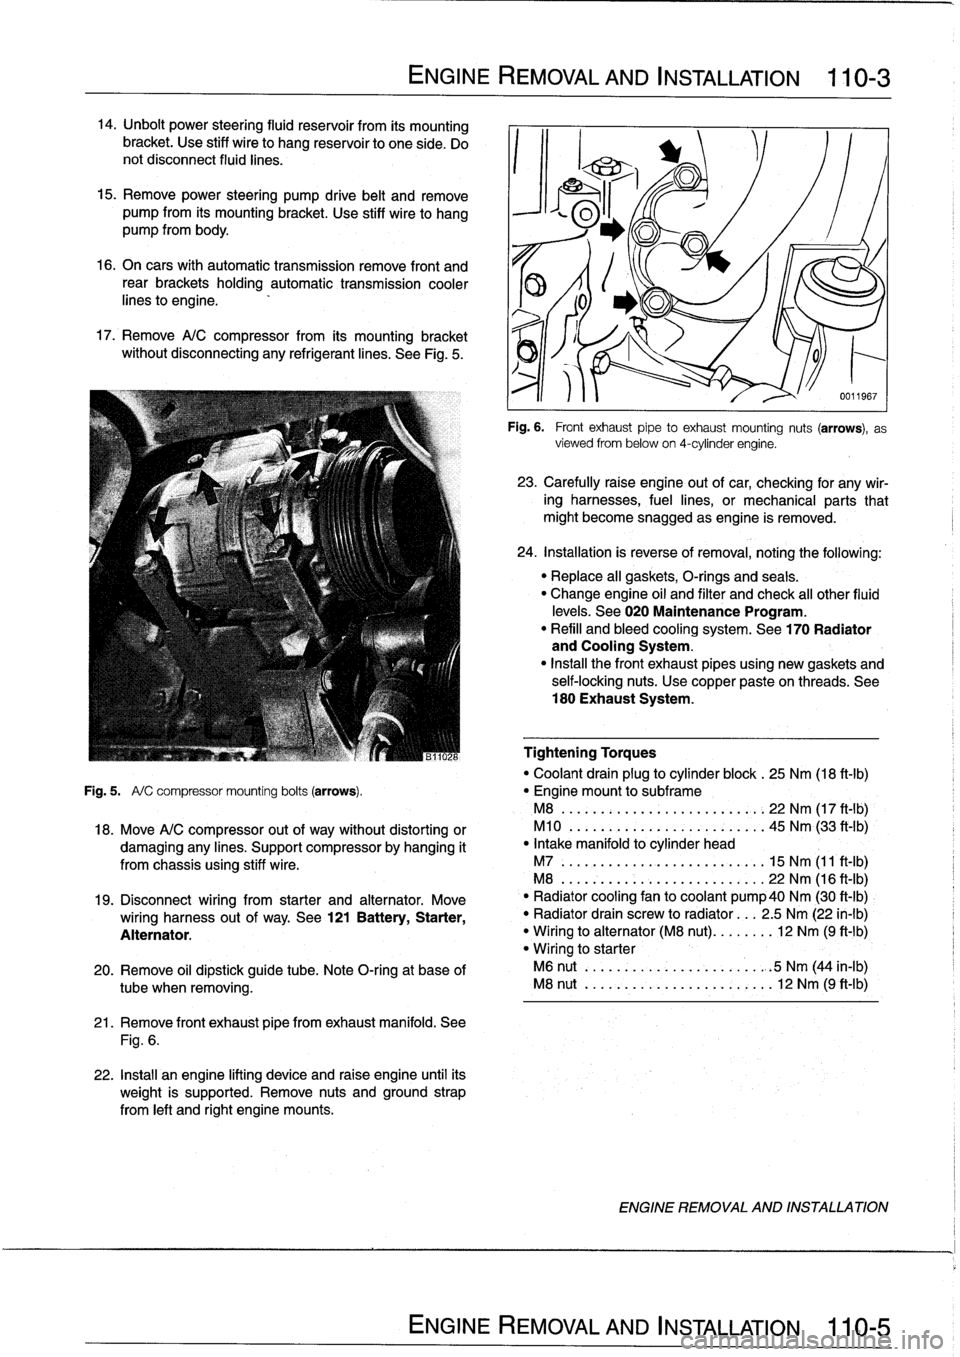 BMW 318i 1994 E36 Workshop Manual 14
.
Unbolt
power
steering
fluid
reservoir
from
íts
mounting
bracket
.
Use
stiff
wire
to
hang
reservoir
to
one
side
.
Do
not
disconnect
fluid
lines
.

15
.
Remove
power
steering
pump
drive
belt
and
r